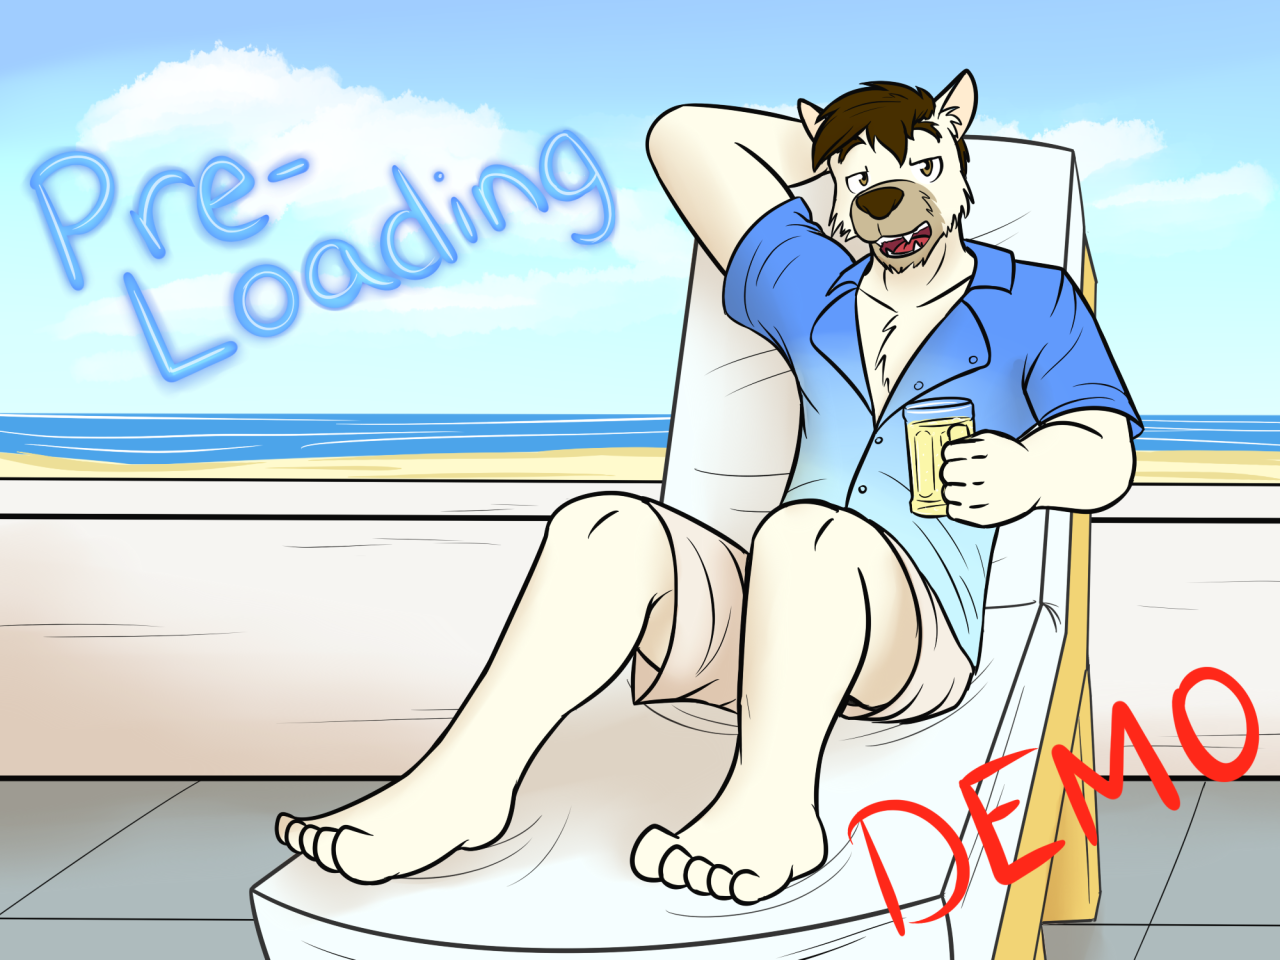 Pre-Loading (Demo) - An Adult Furry Visual NovelWhile browsing a less-than-wholesome